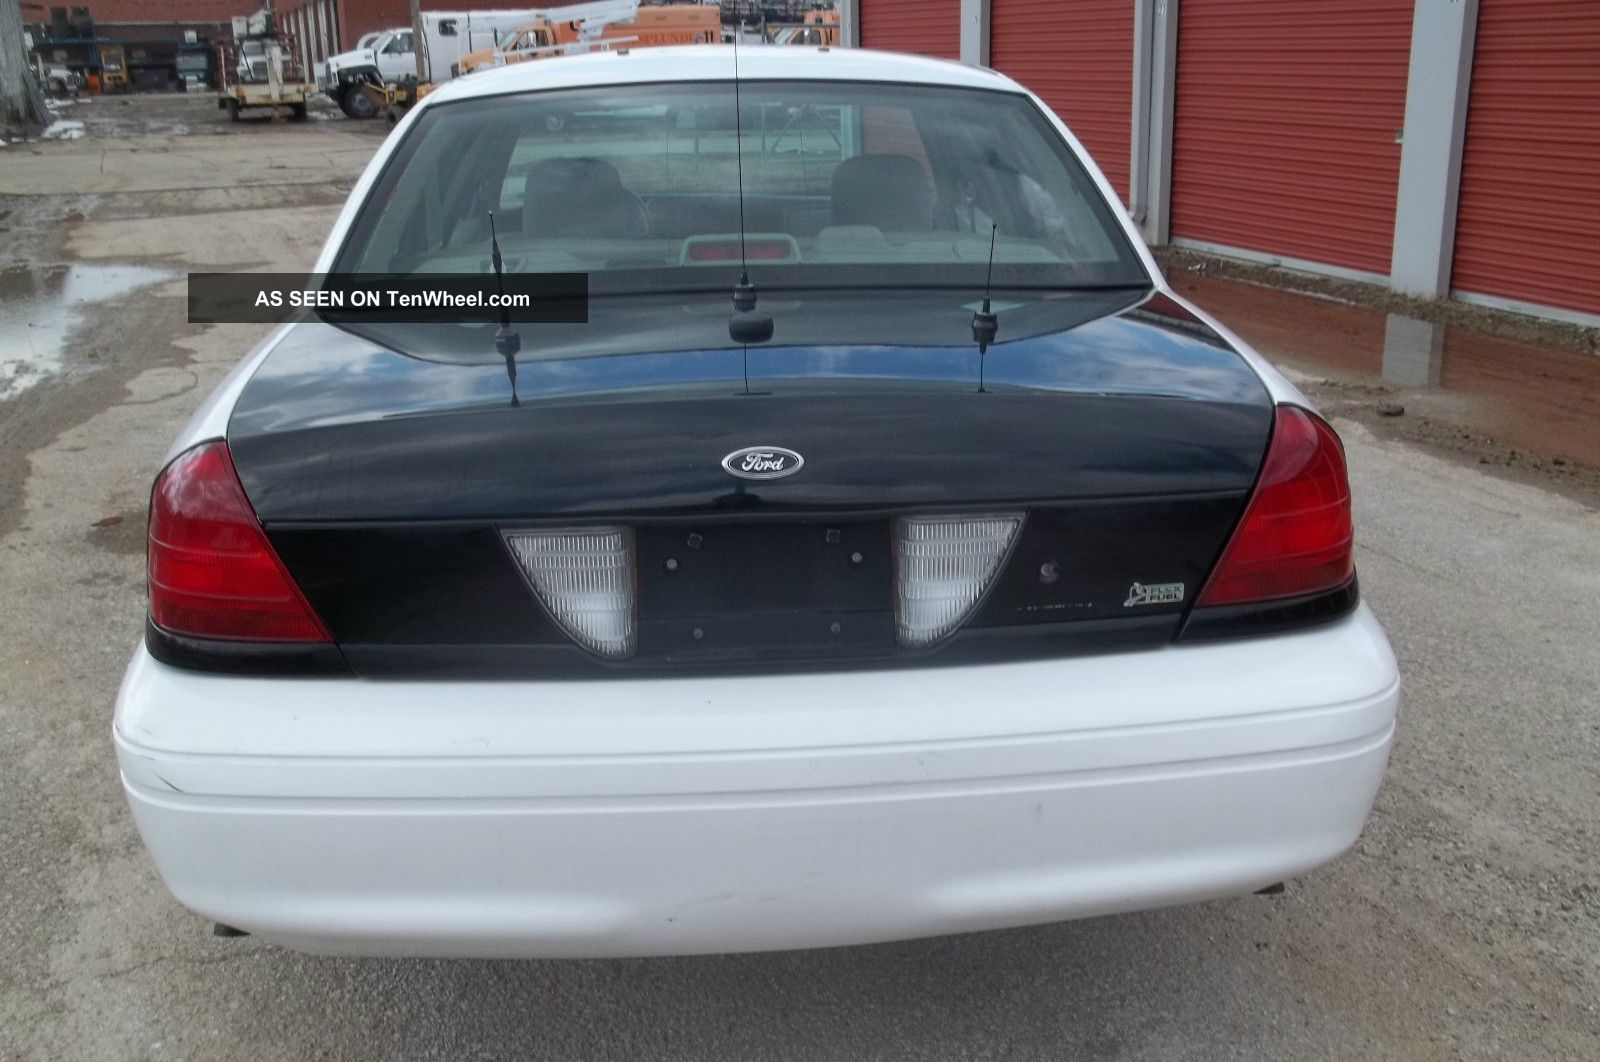 Ford crown victoria with the 5.0 liter police interceptor package